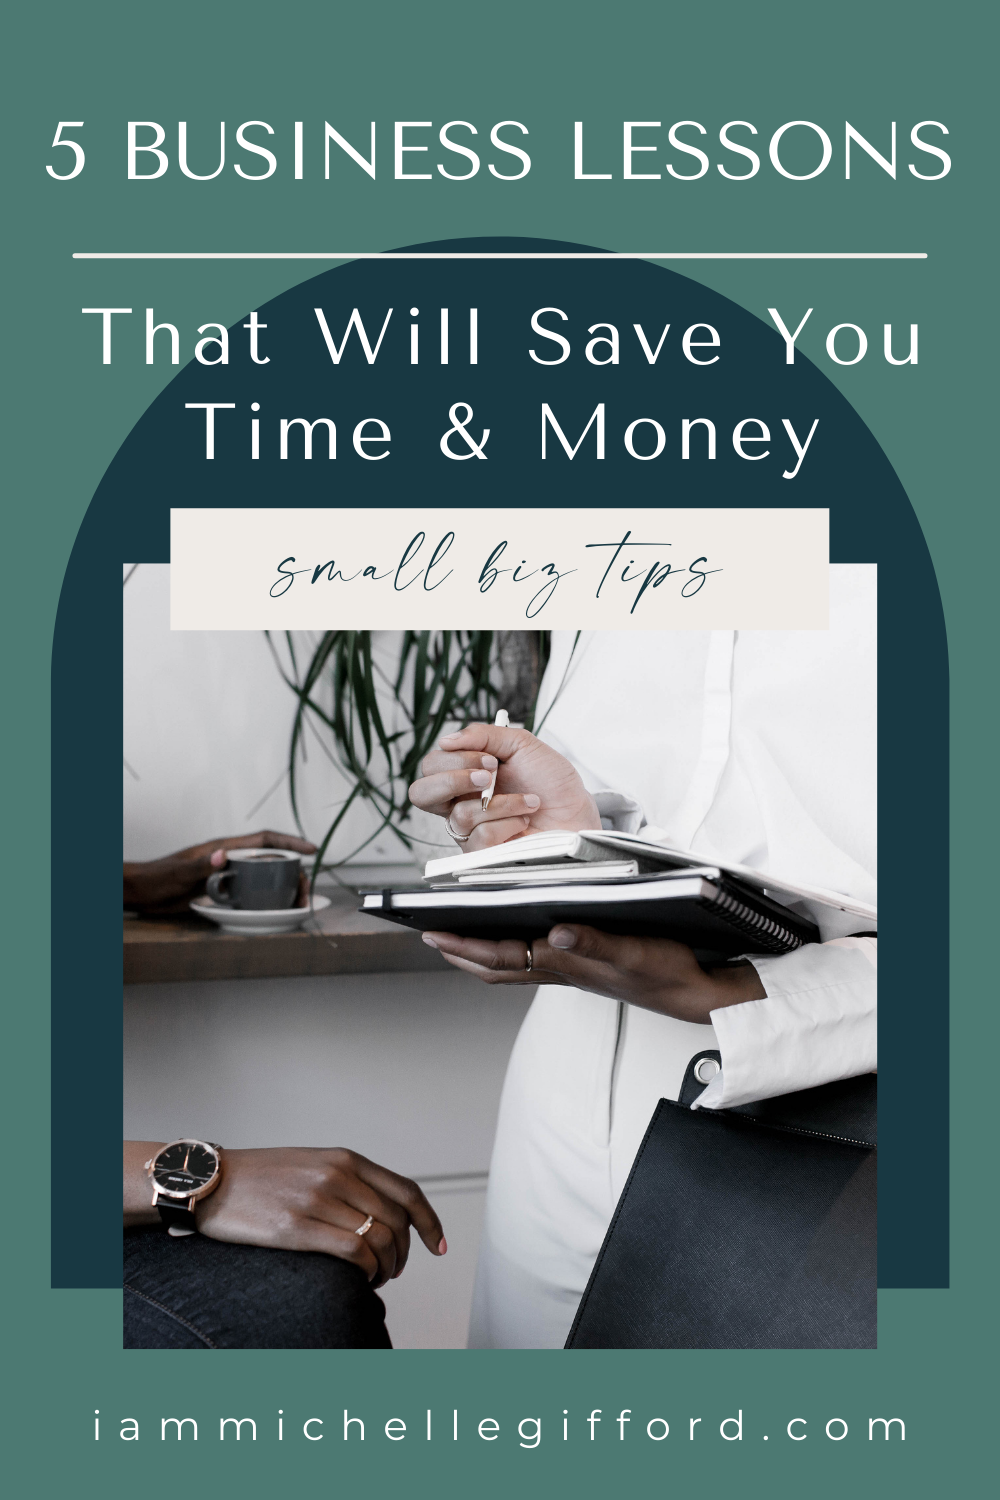 5 business lessons that will save you time and money iammichellegifford.com.